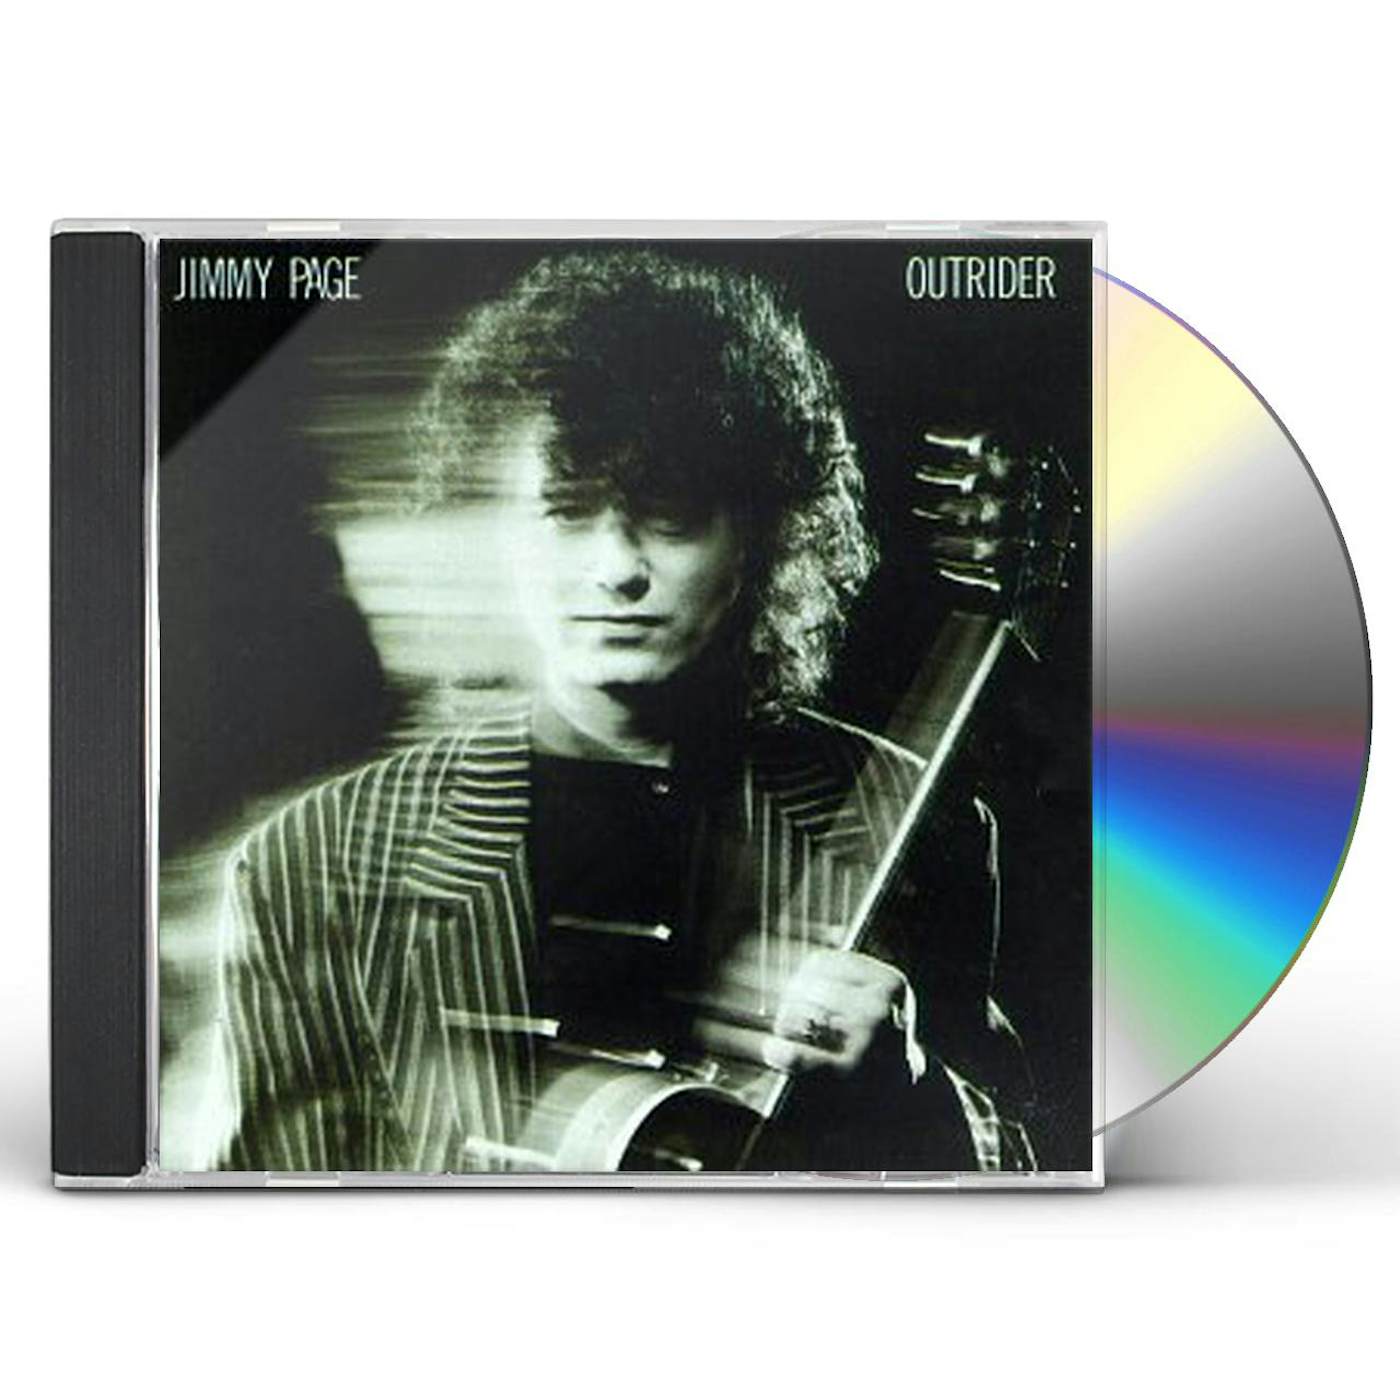 Jimmy Page OUTRIDER CD